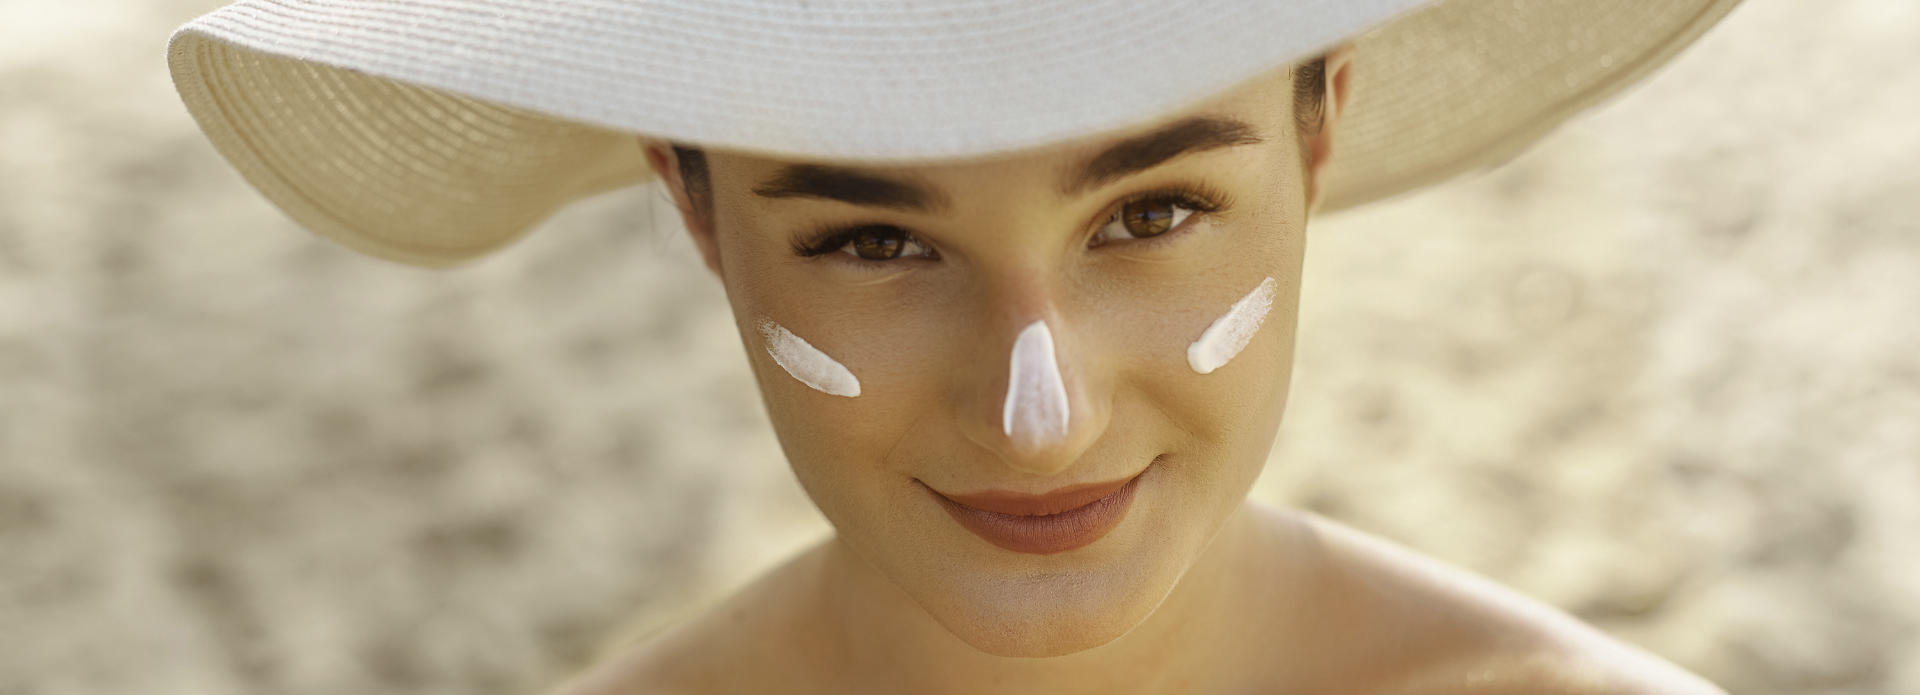 Sunbathing young woman with sunscreen on her face wearing a hat to protect from the sun.